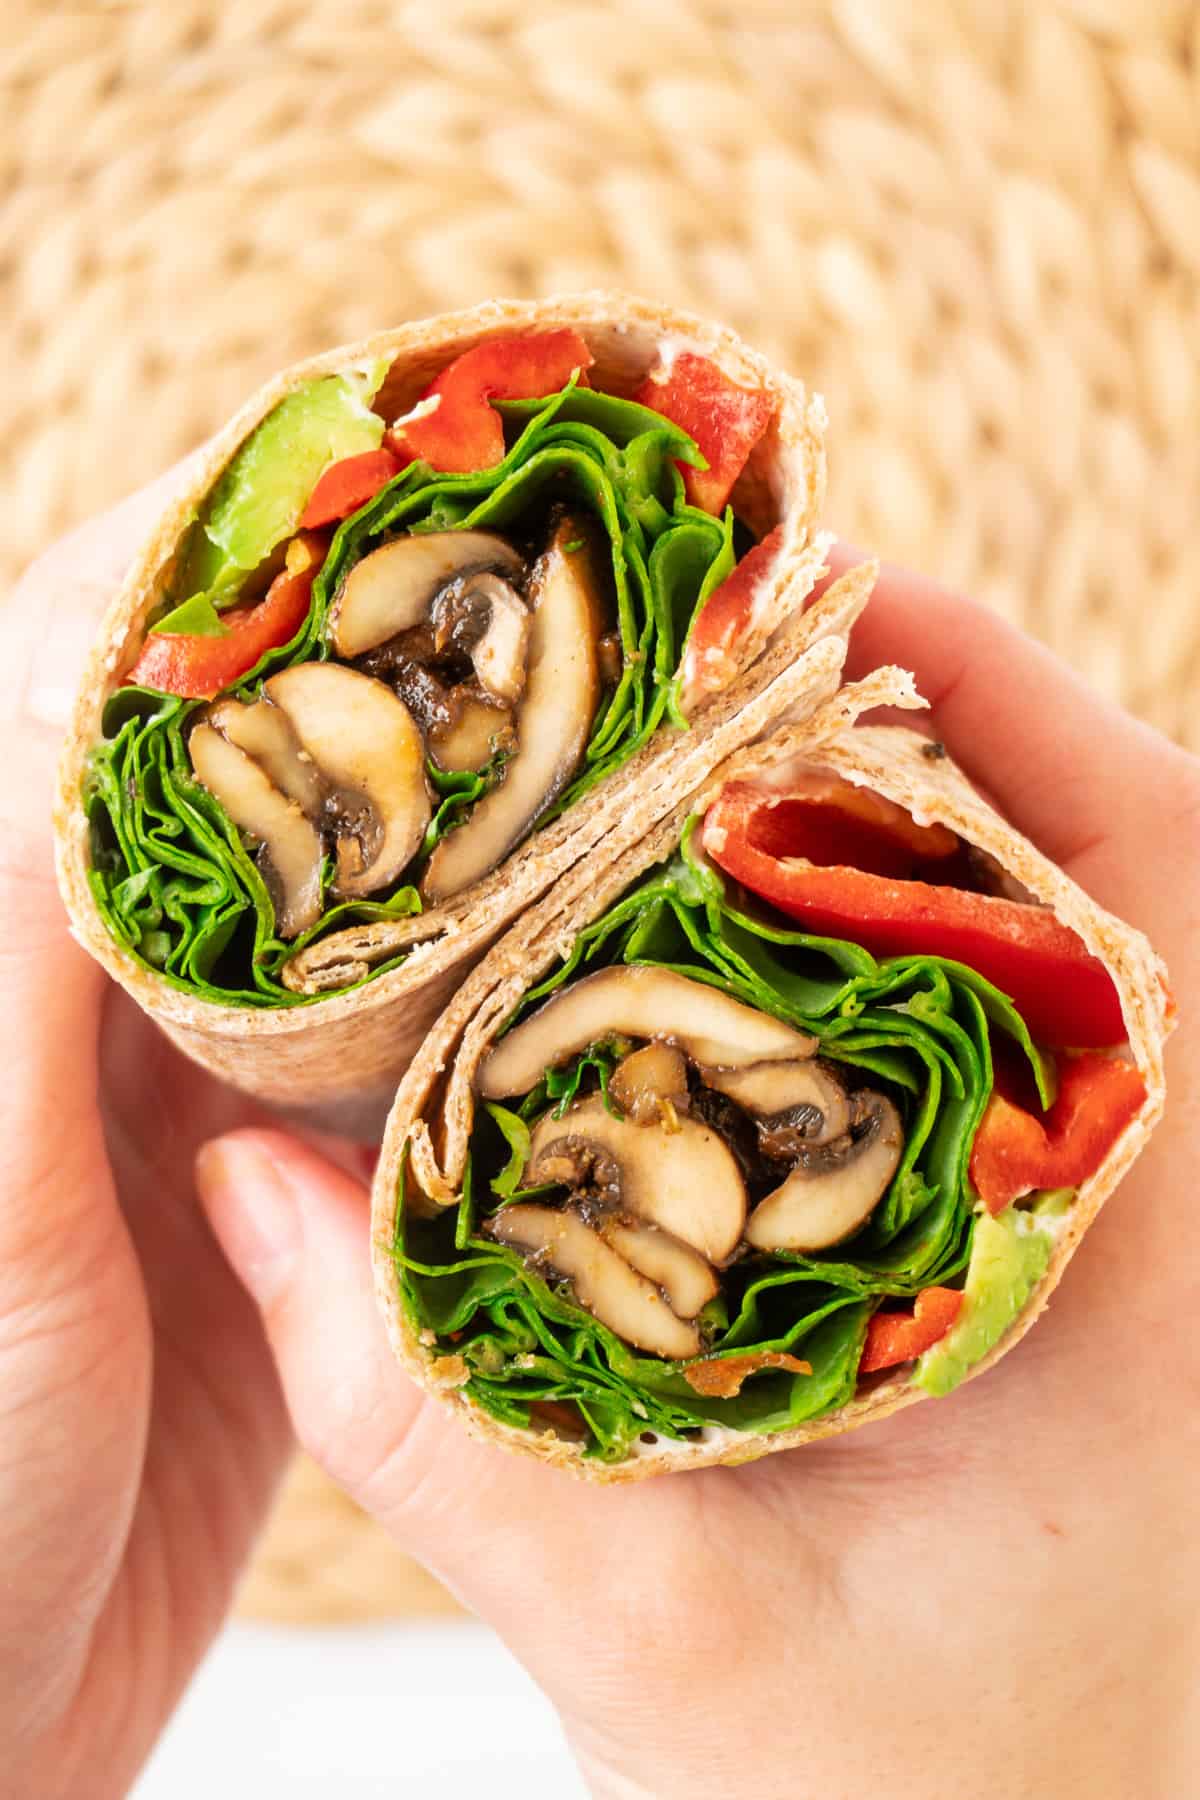 Hands holding a cut open wrap revealing the mushroom, spinach, red pepper and avocado filling.